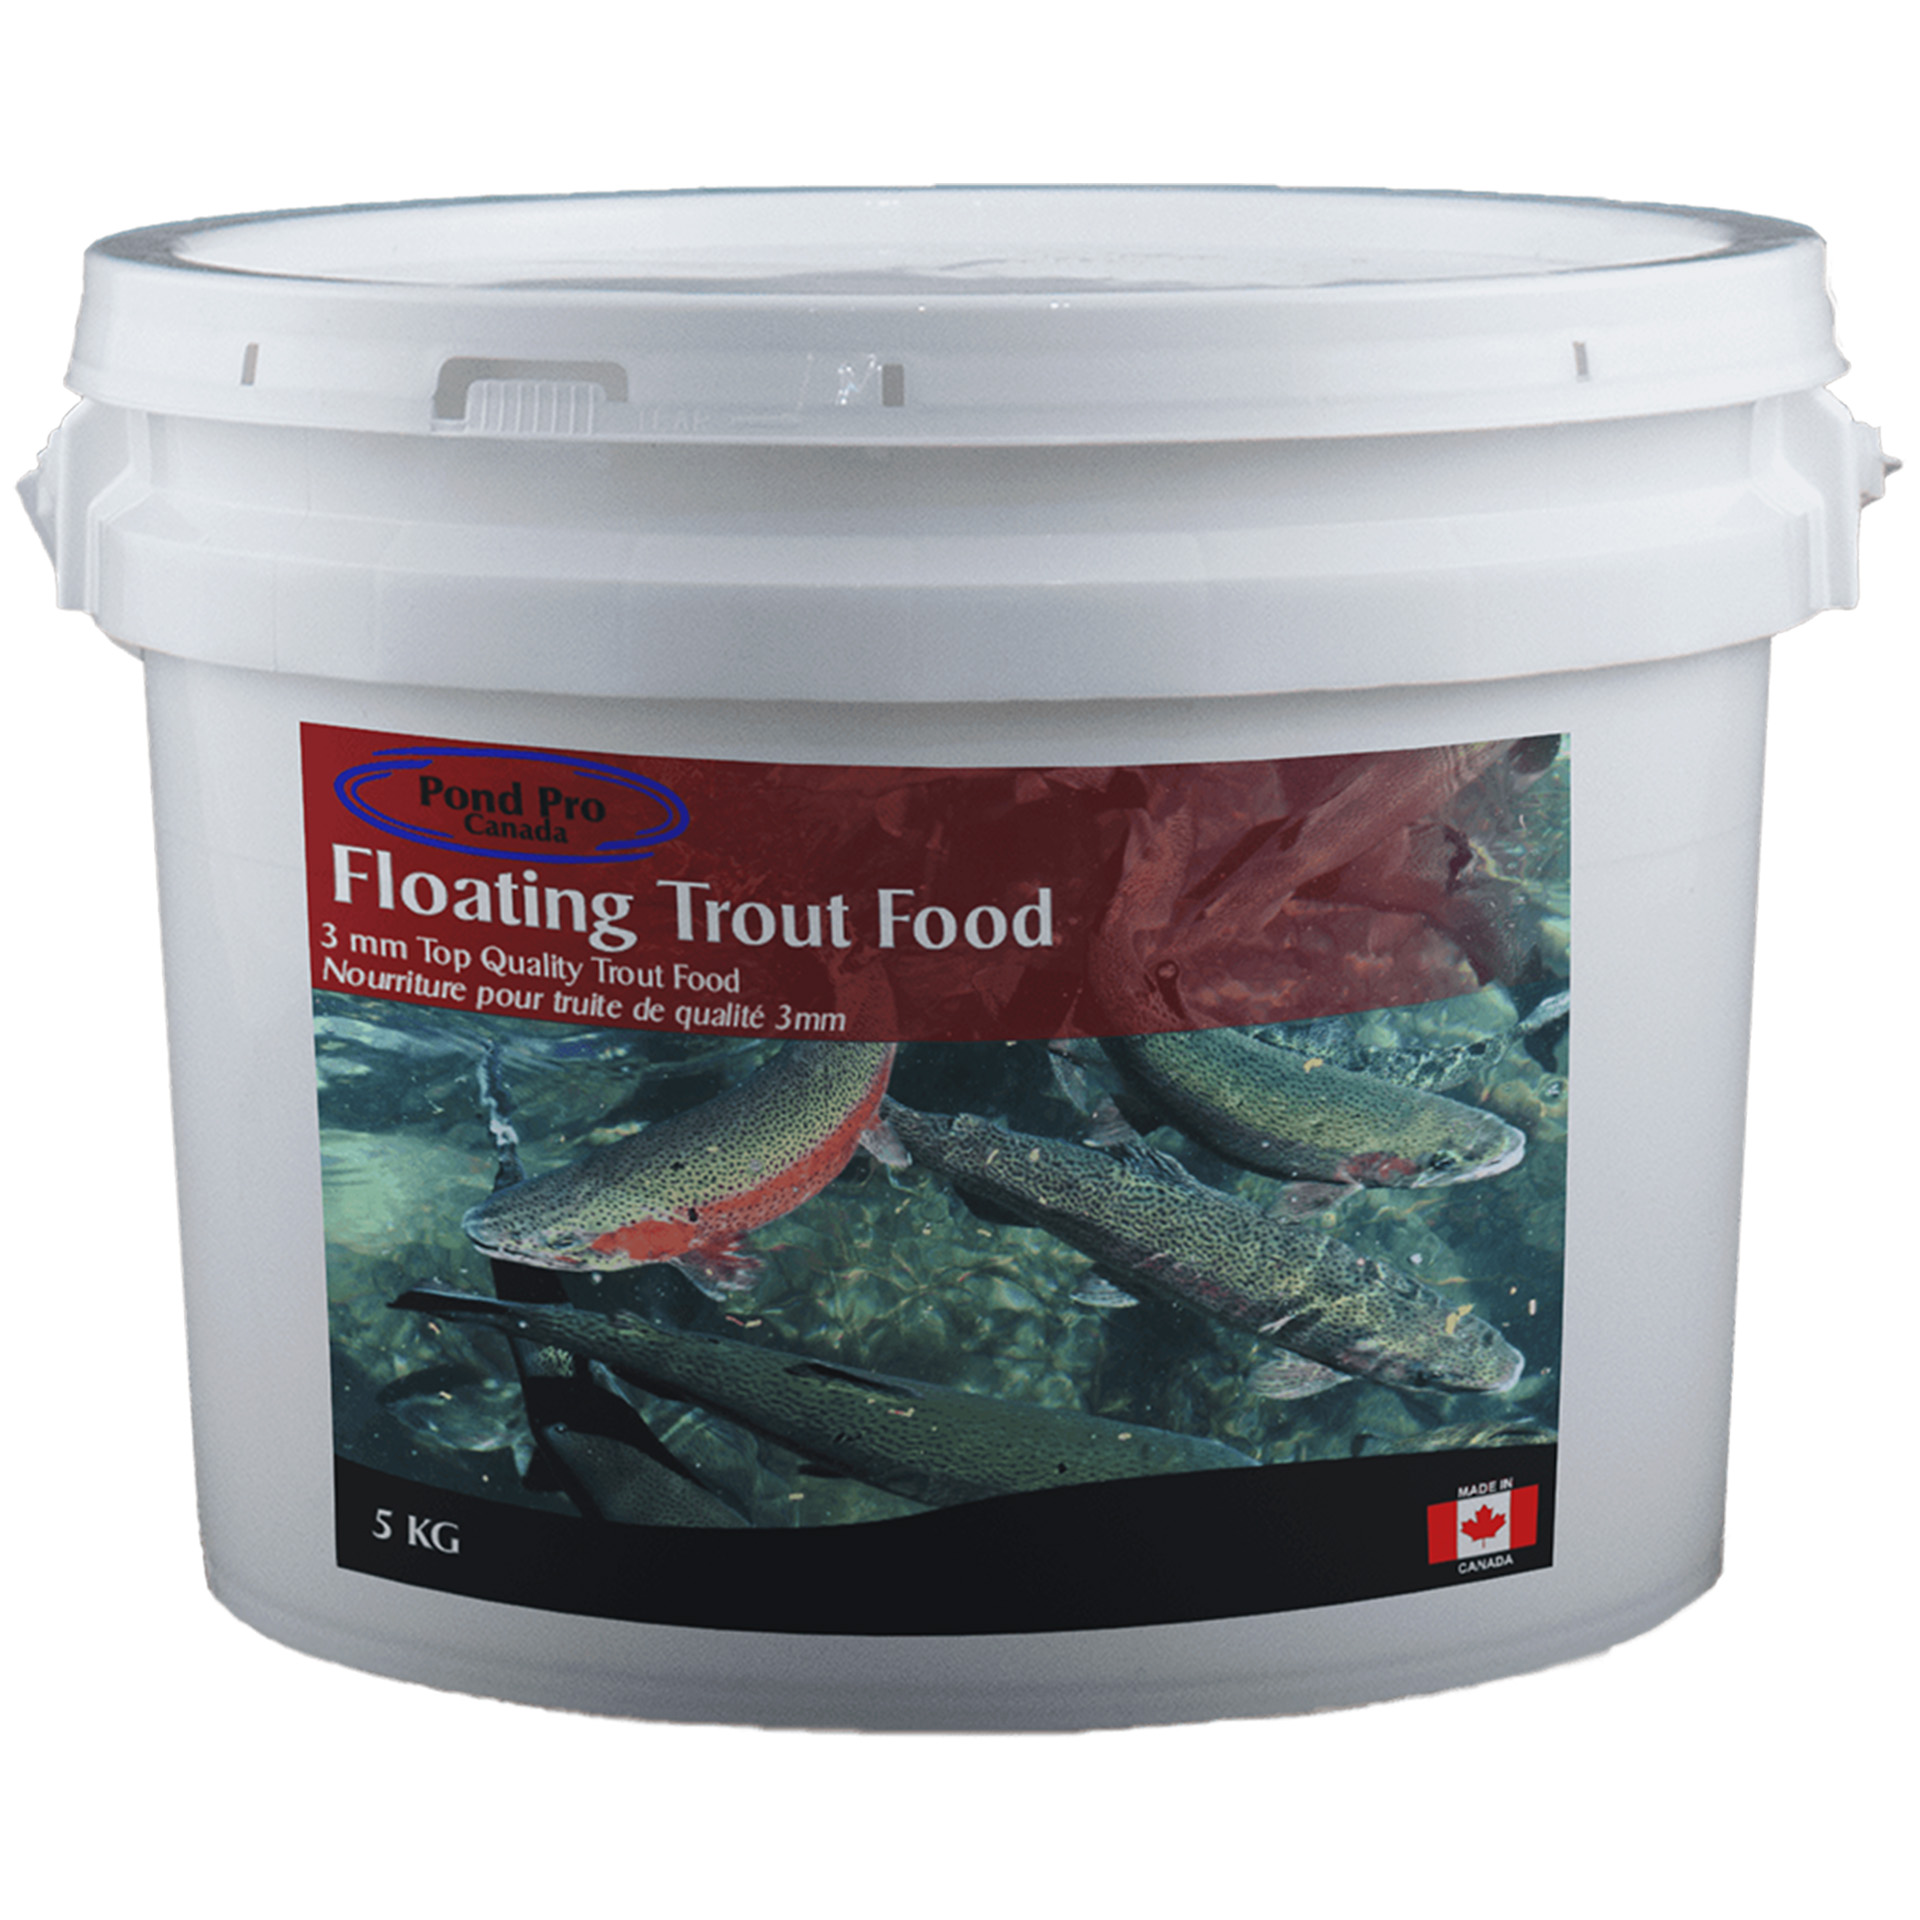 Pond Pro Floating Trout Fish Food - 5mm